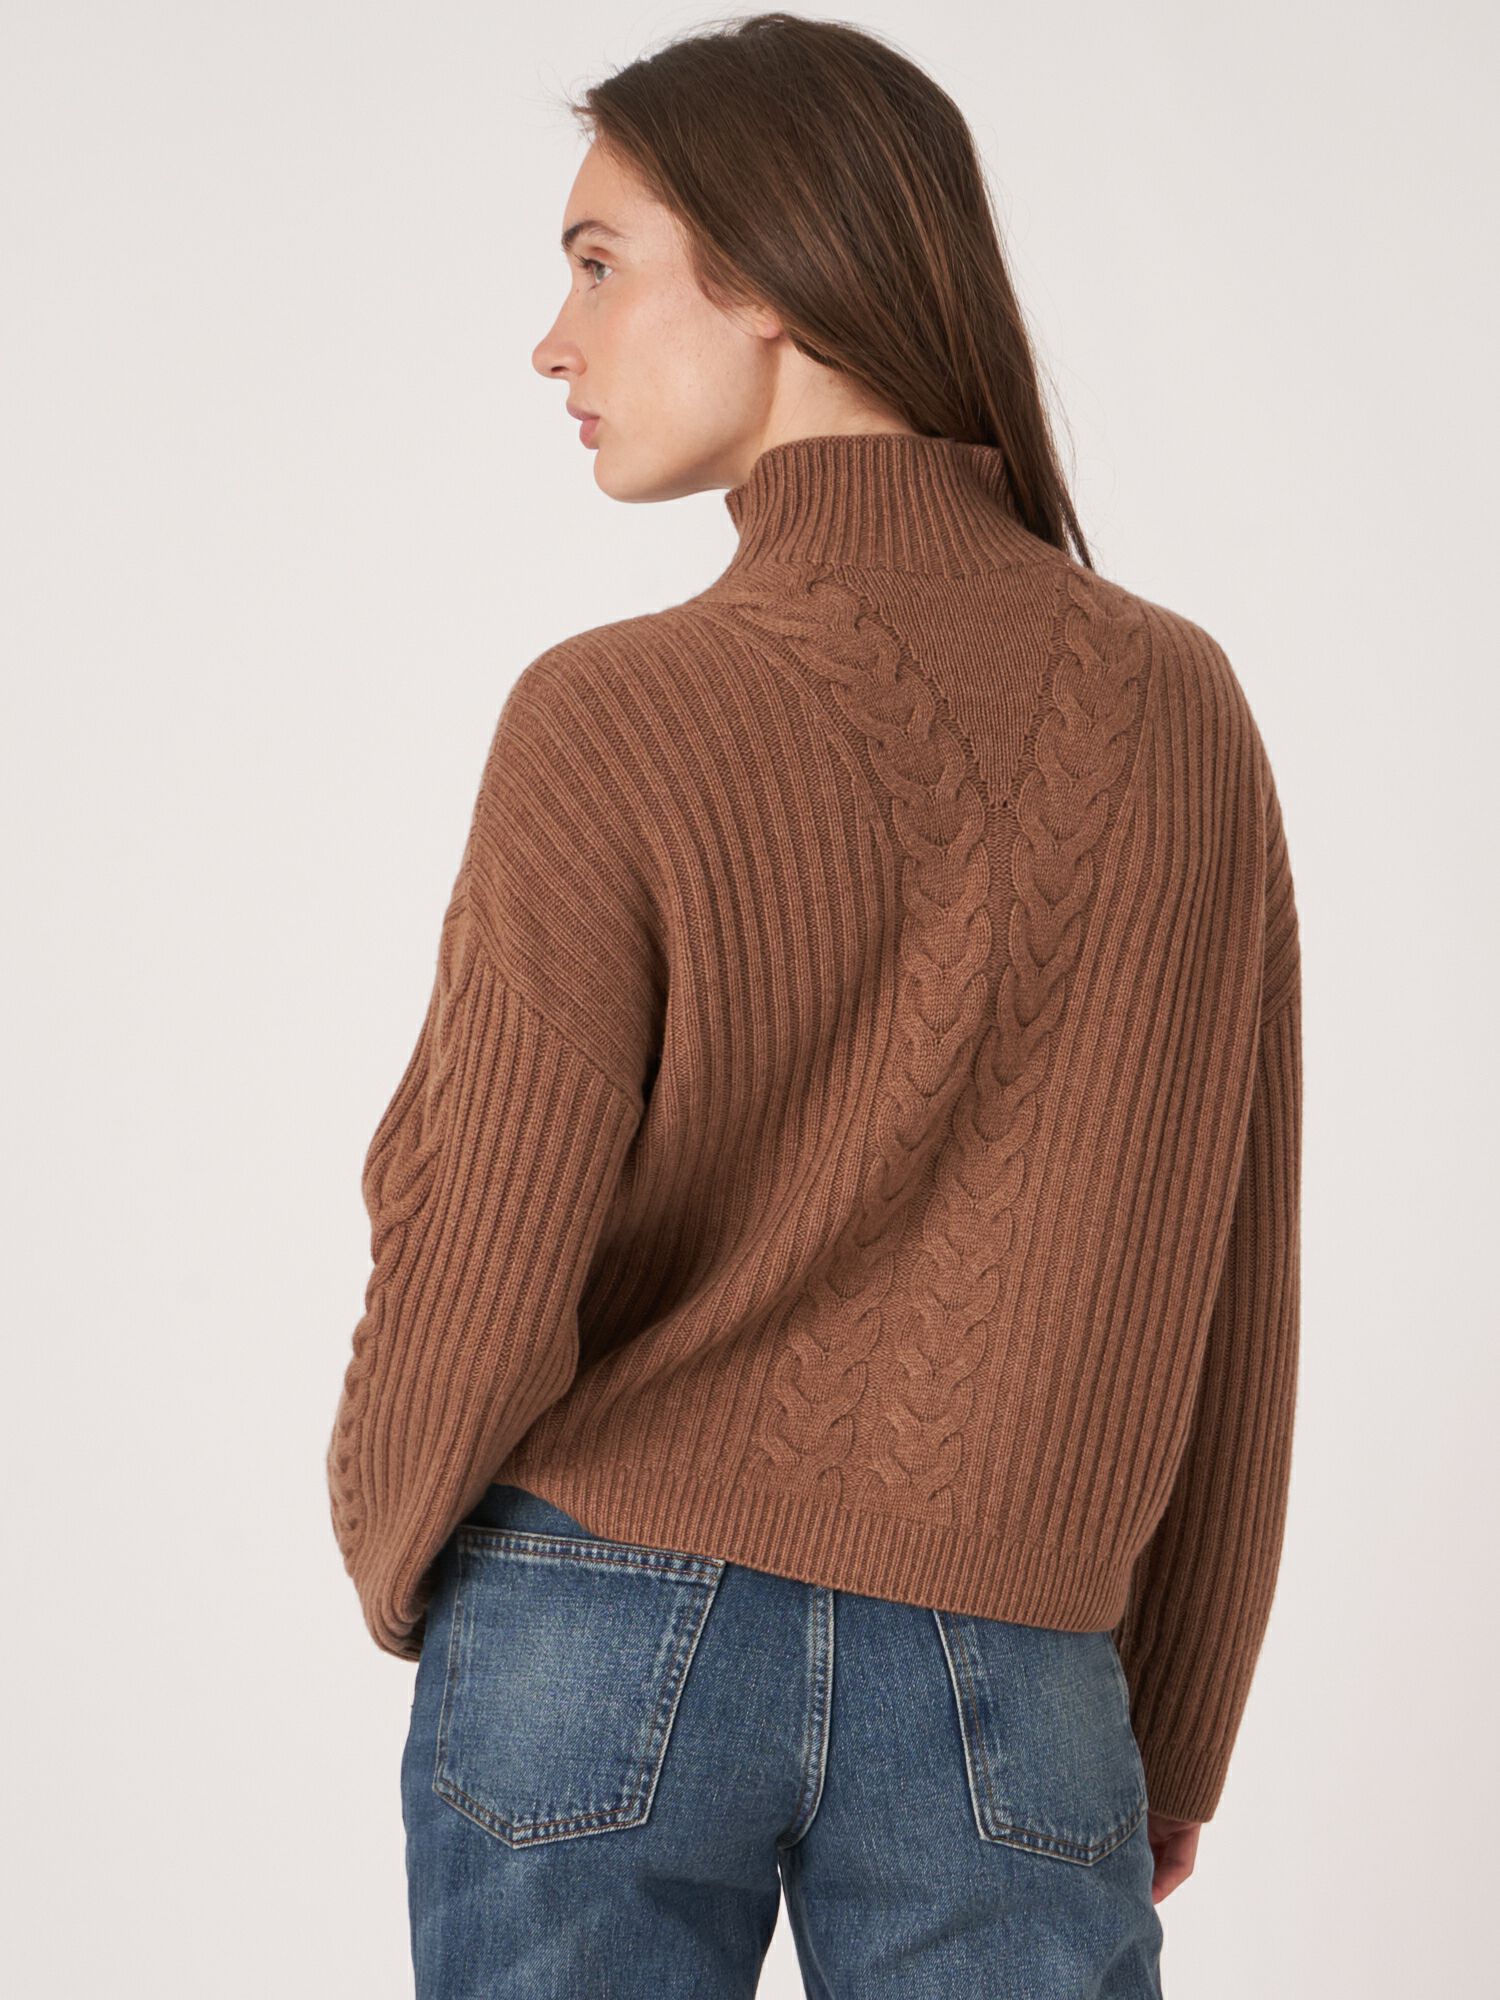 High neck rib knit sweater with cable knit detail